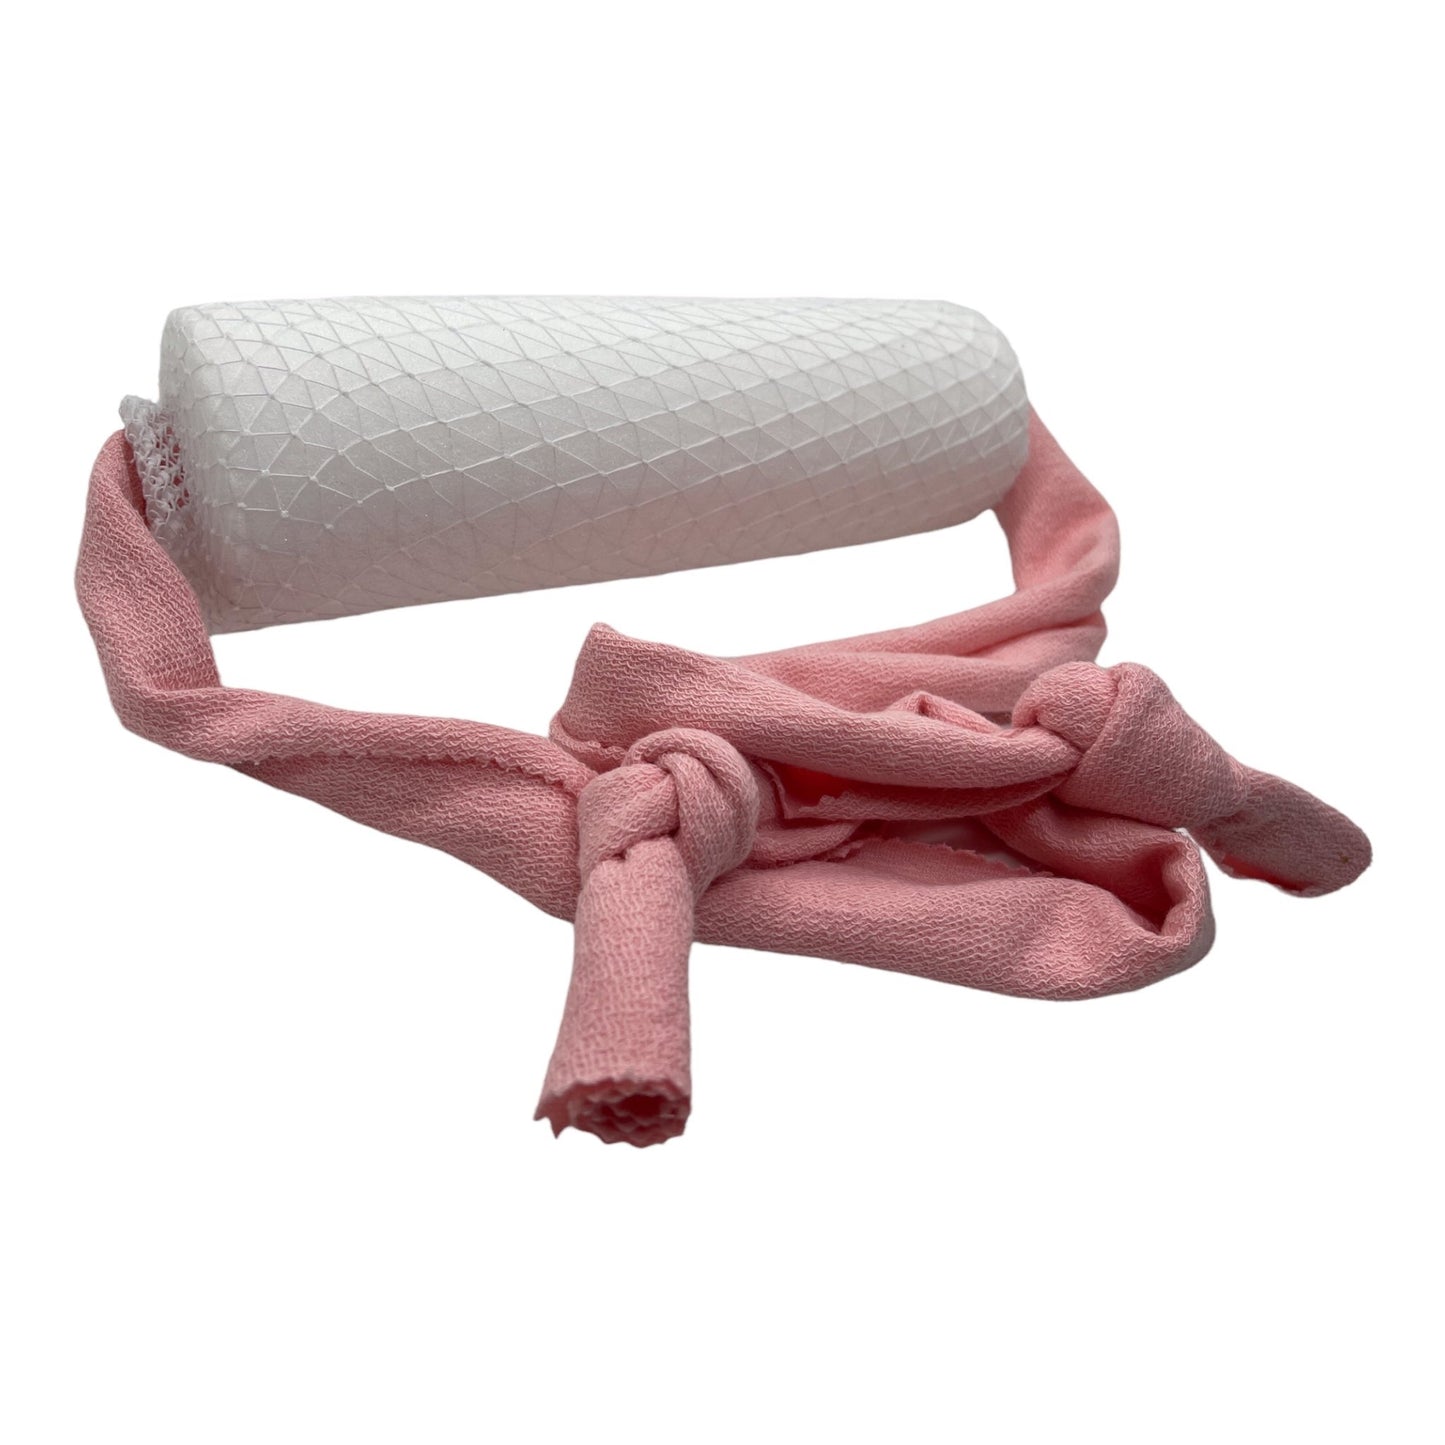 Basin Bliss Hair Salon Neck Rest Pillow- Personal take along support for the hair salon (Pink) - Basin Bliss